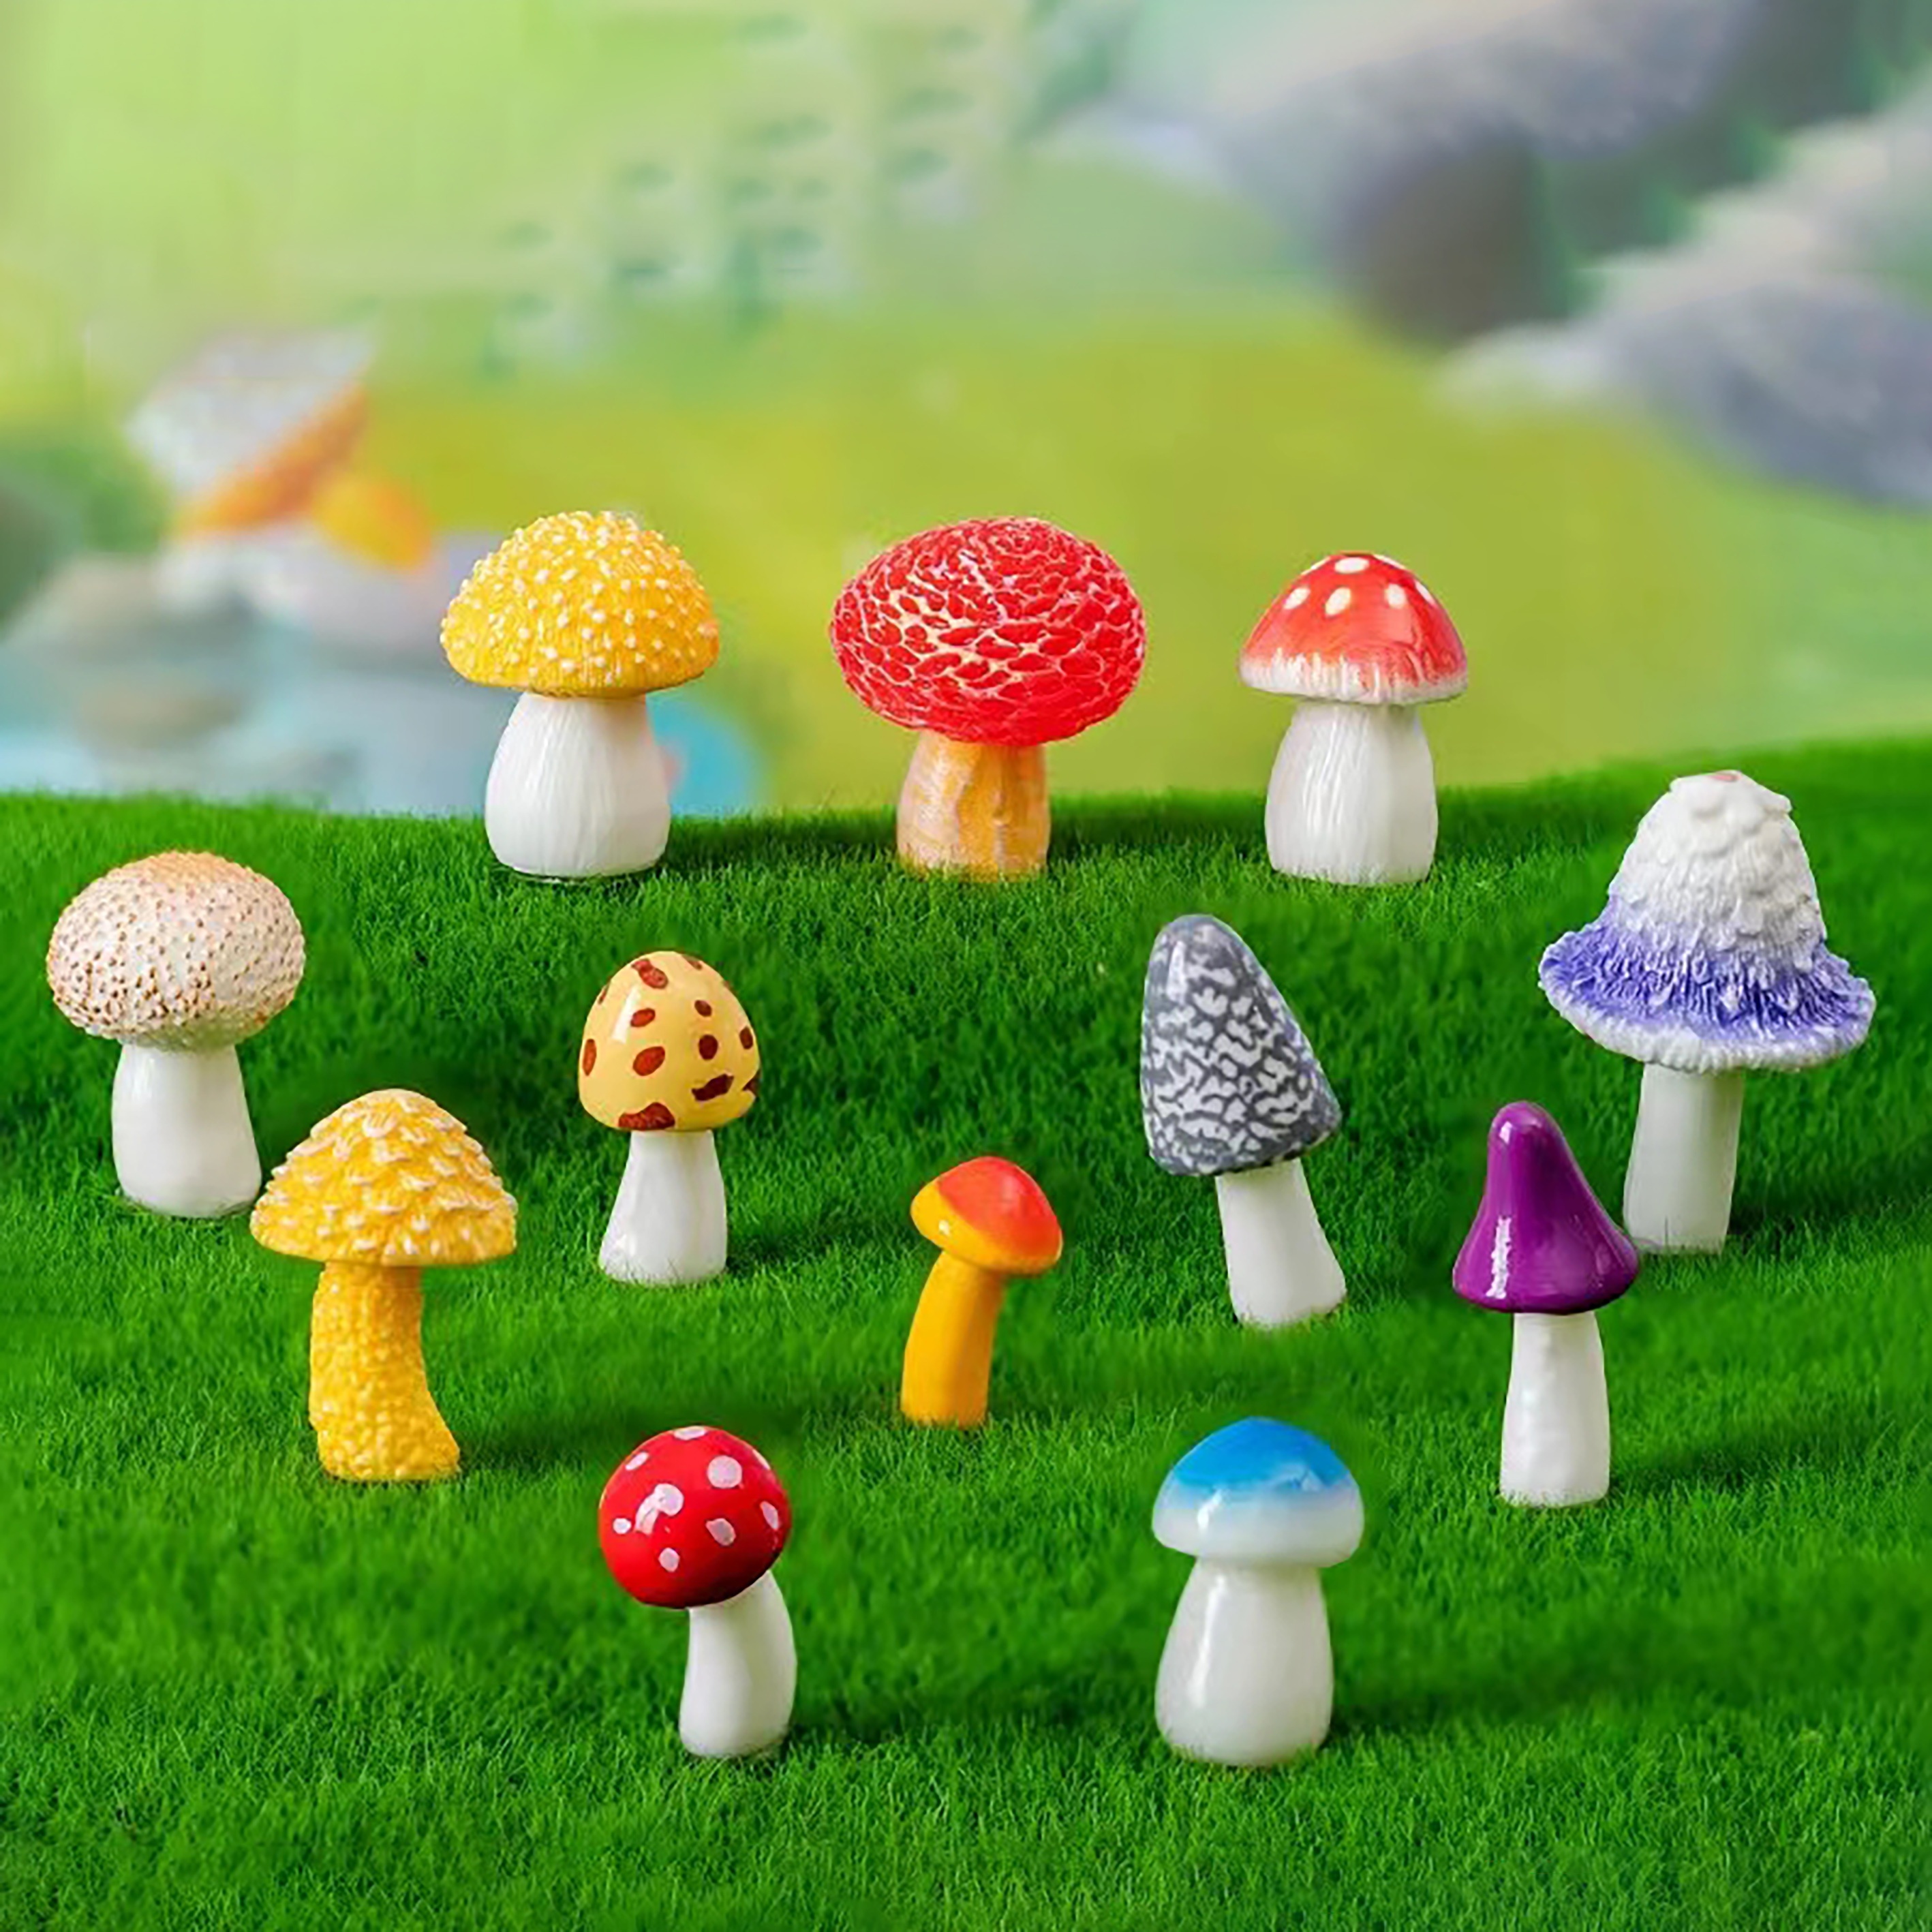 

6pcs Resin Simulation Creative Jungle Mushroom Decoration, Bright Colors, For Fairy House Courtyard, Horticultural Green Plants, Bonsai Moss Diy Onlookers Landscape